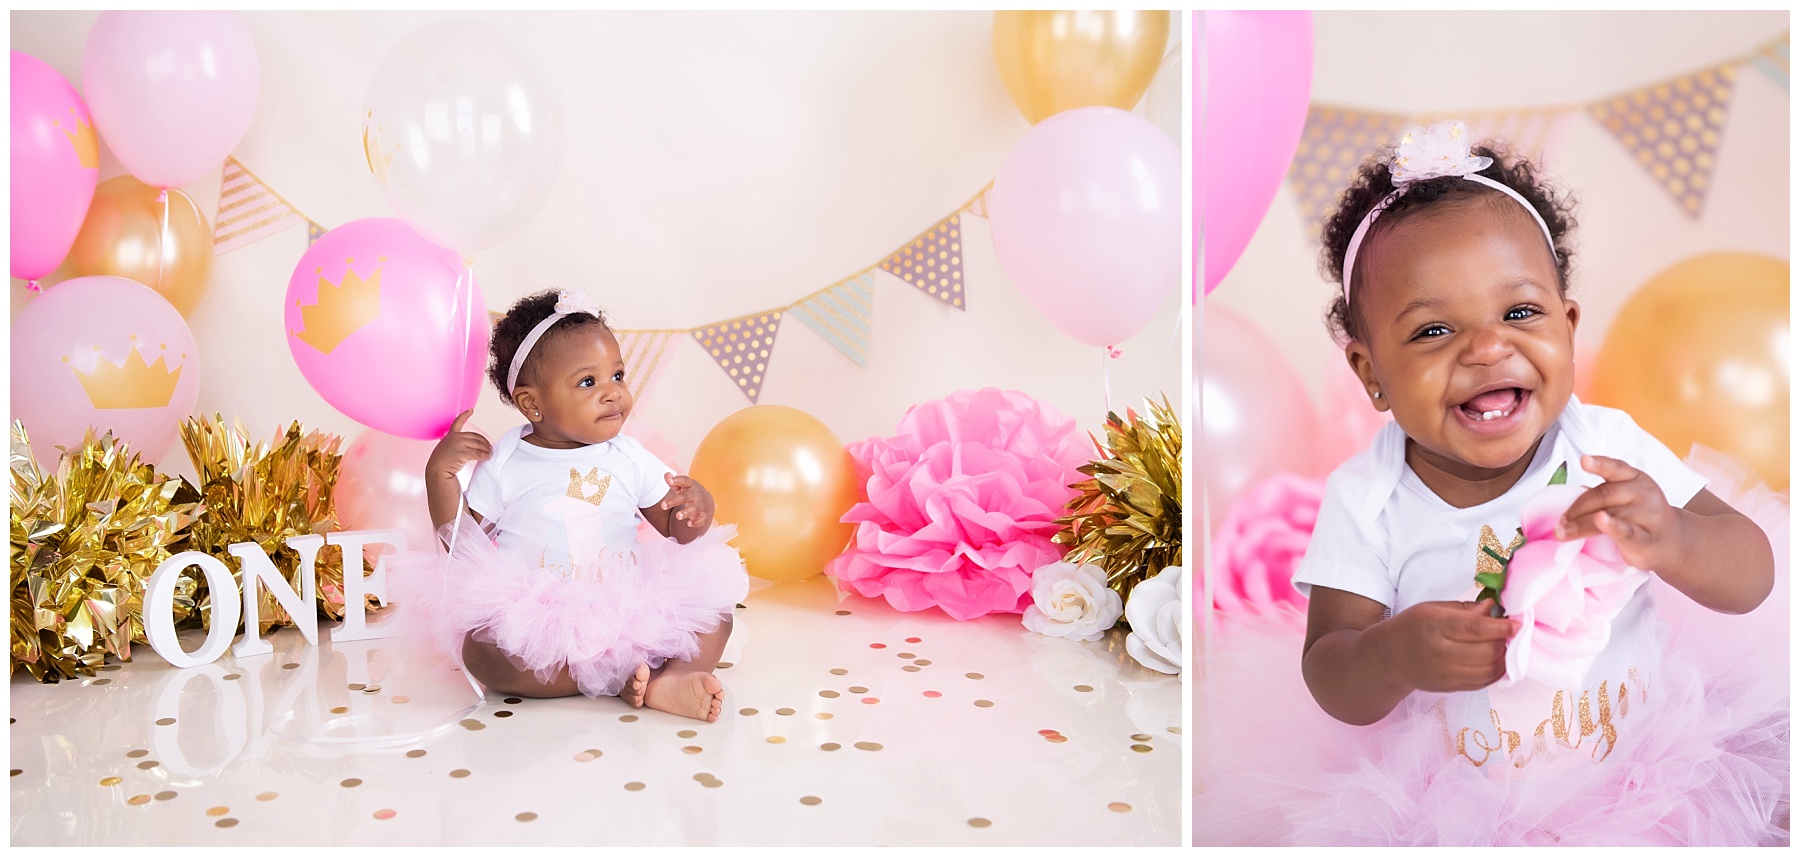 Cake Smash Photography for your little ones first birthday